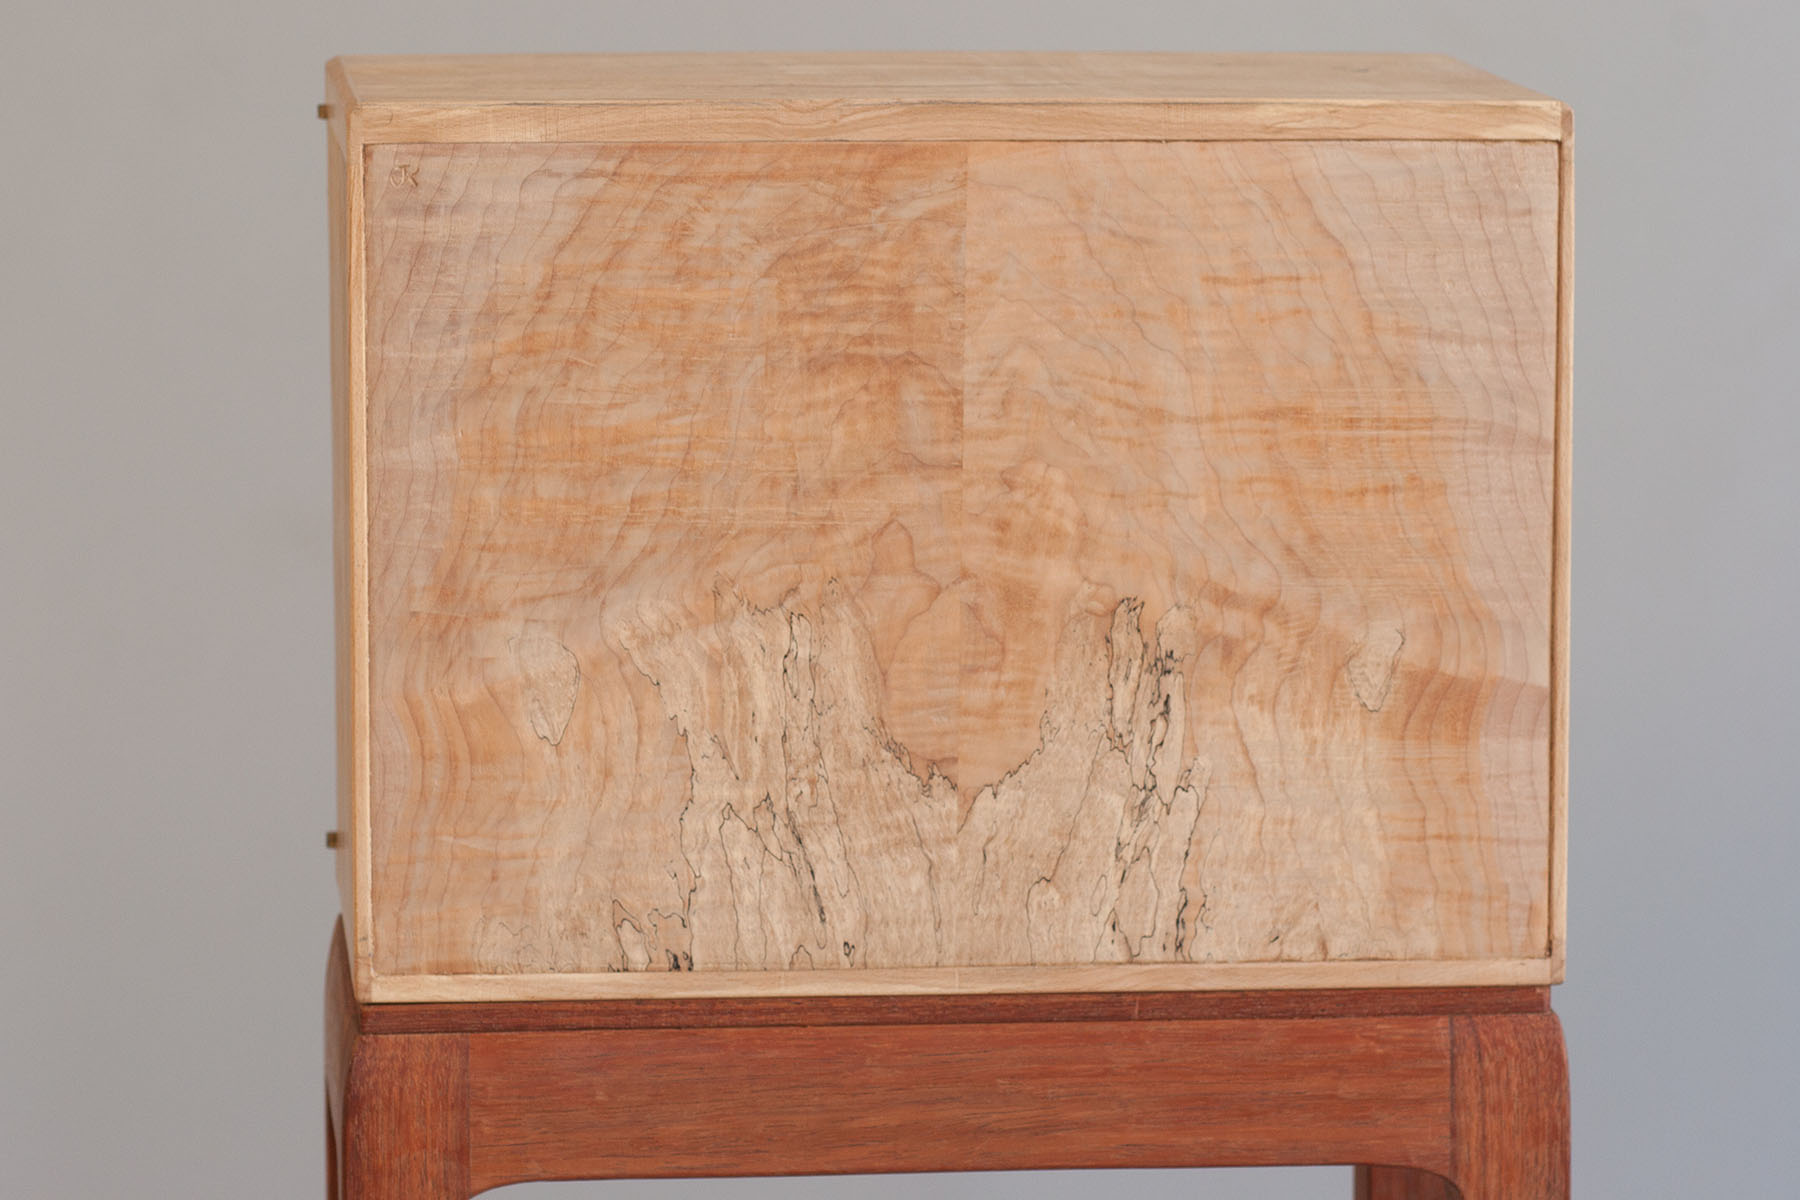 Spalted Maple Burl Cabinet